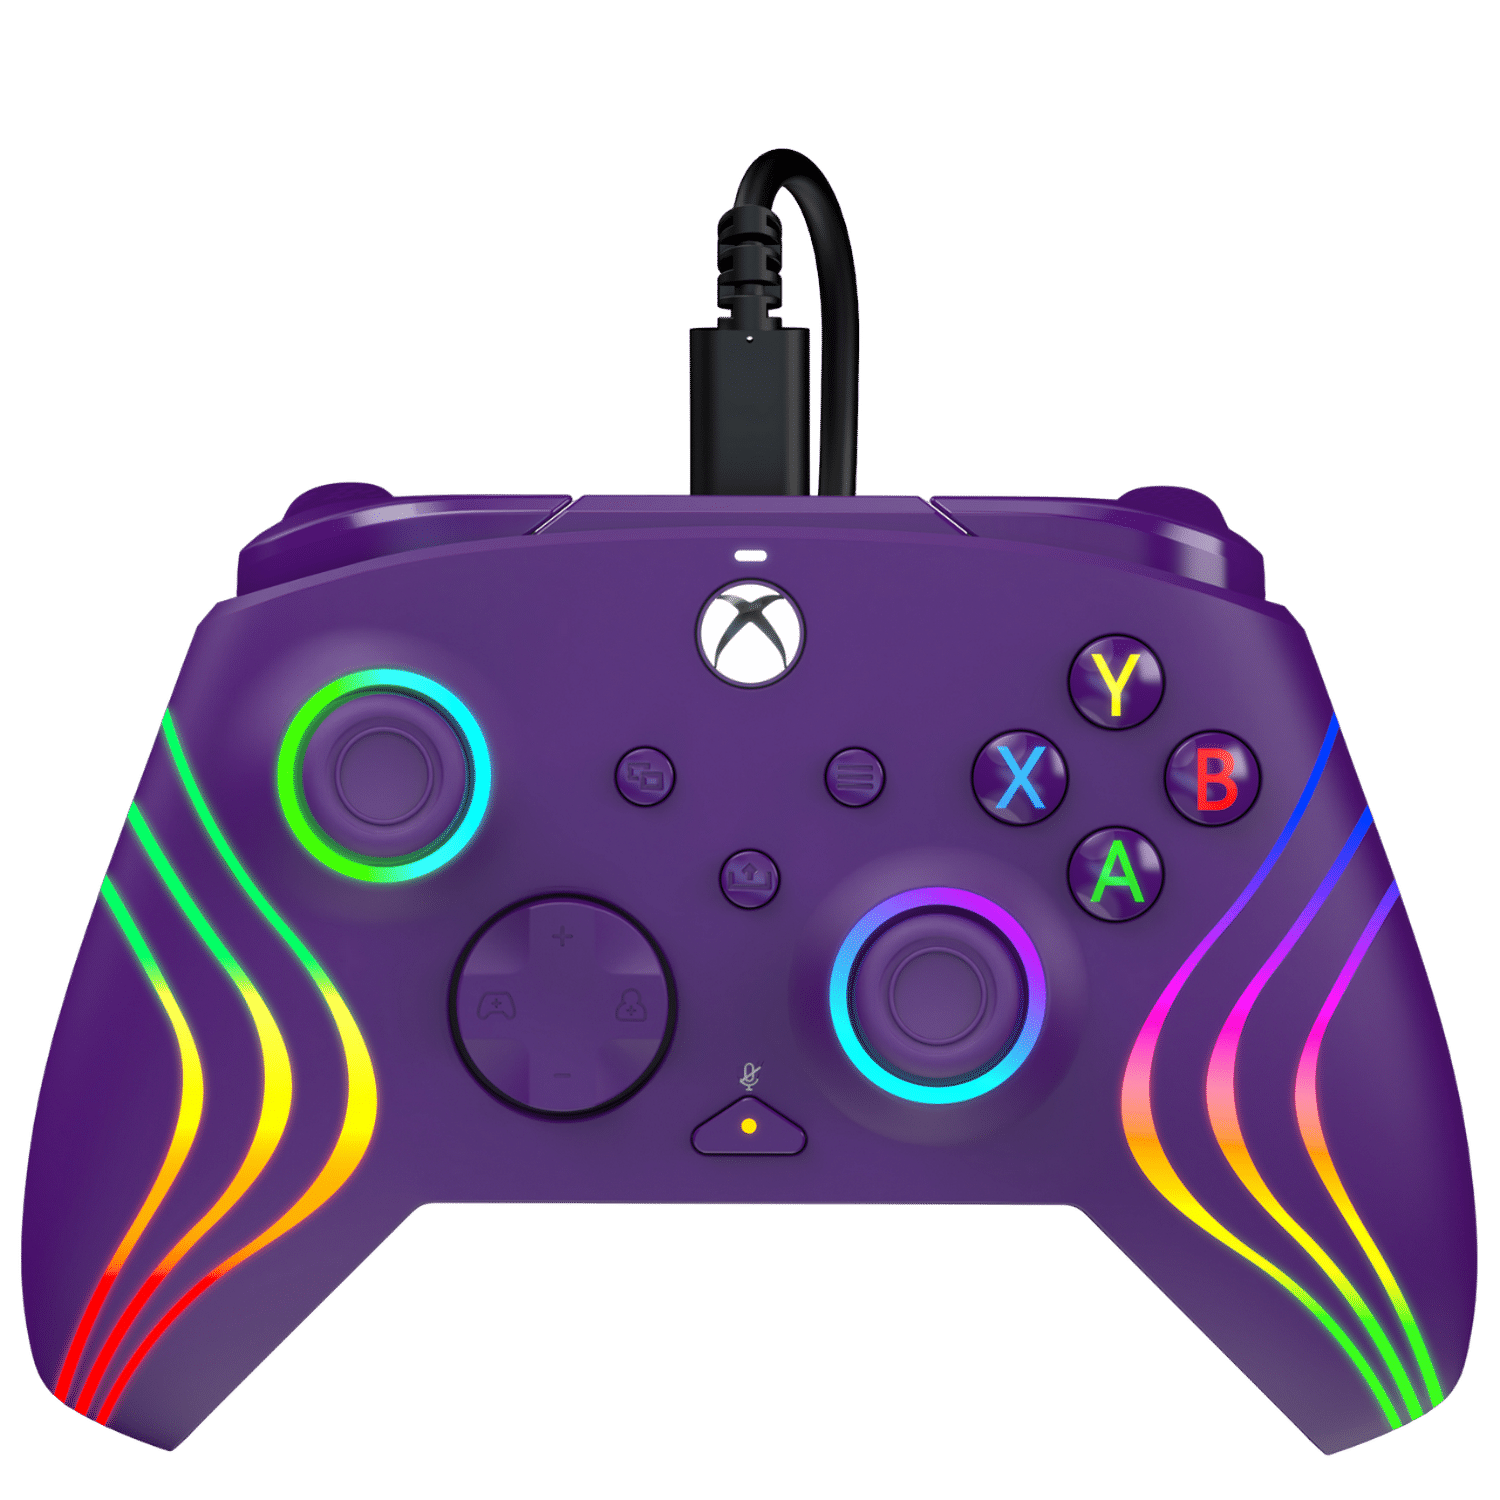 PDP Afterglow Wave Bedrade Controller - Xbox Series X Paars